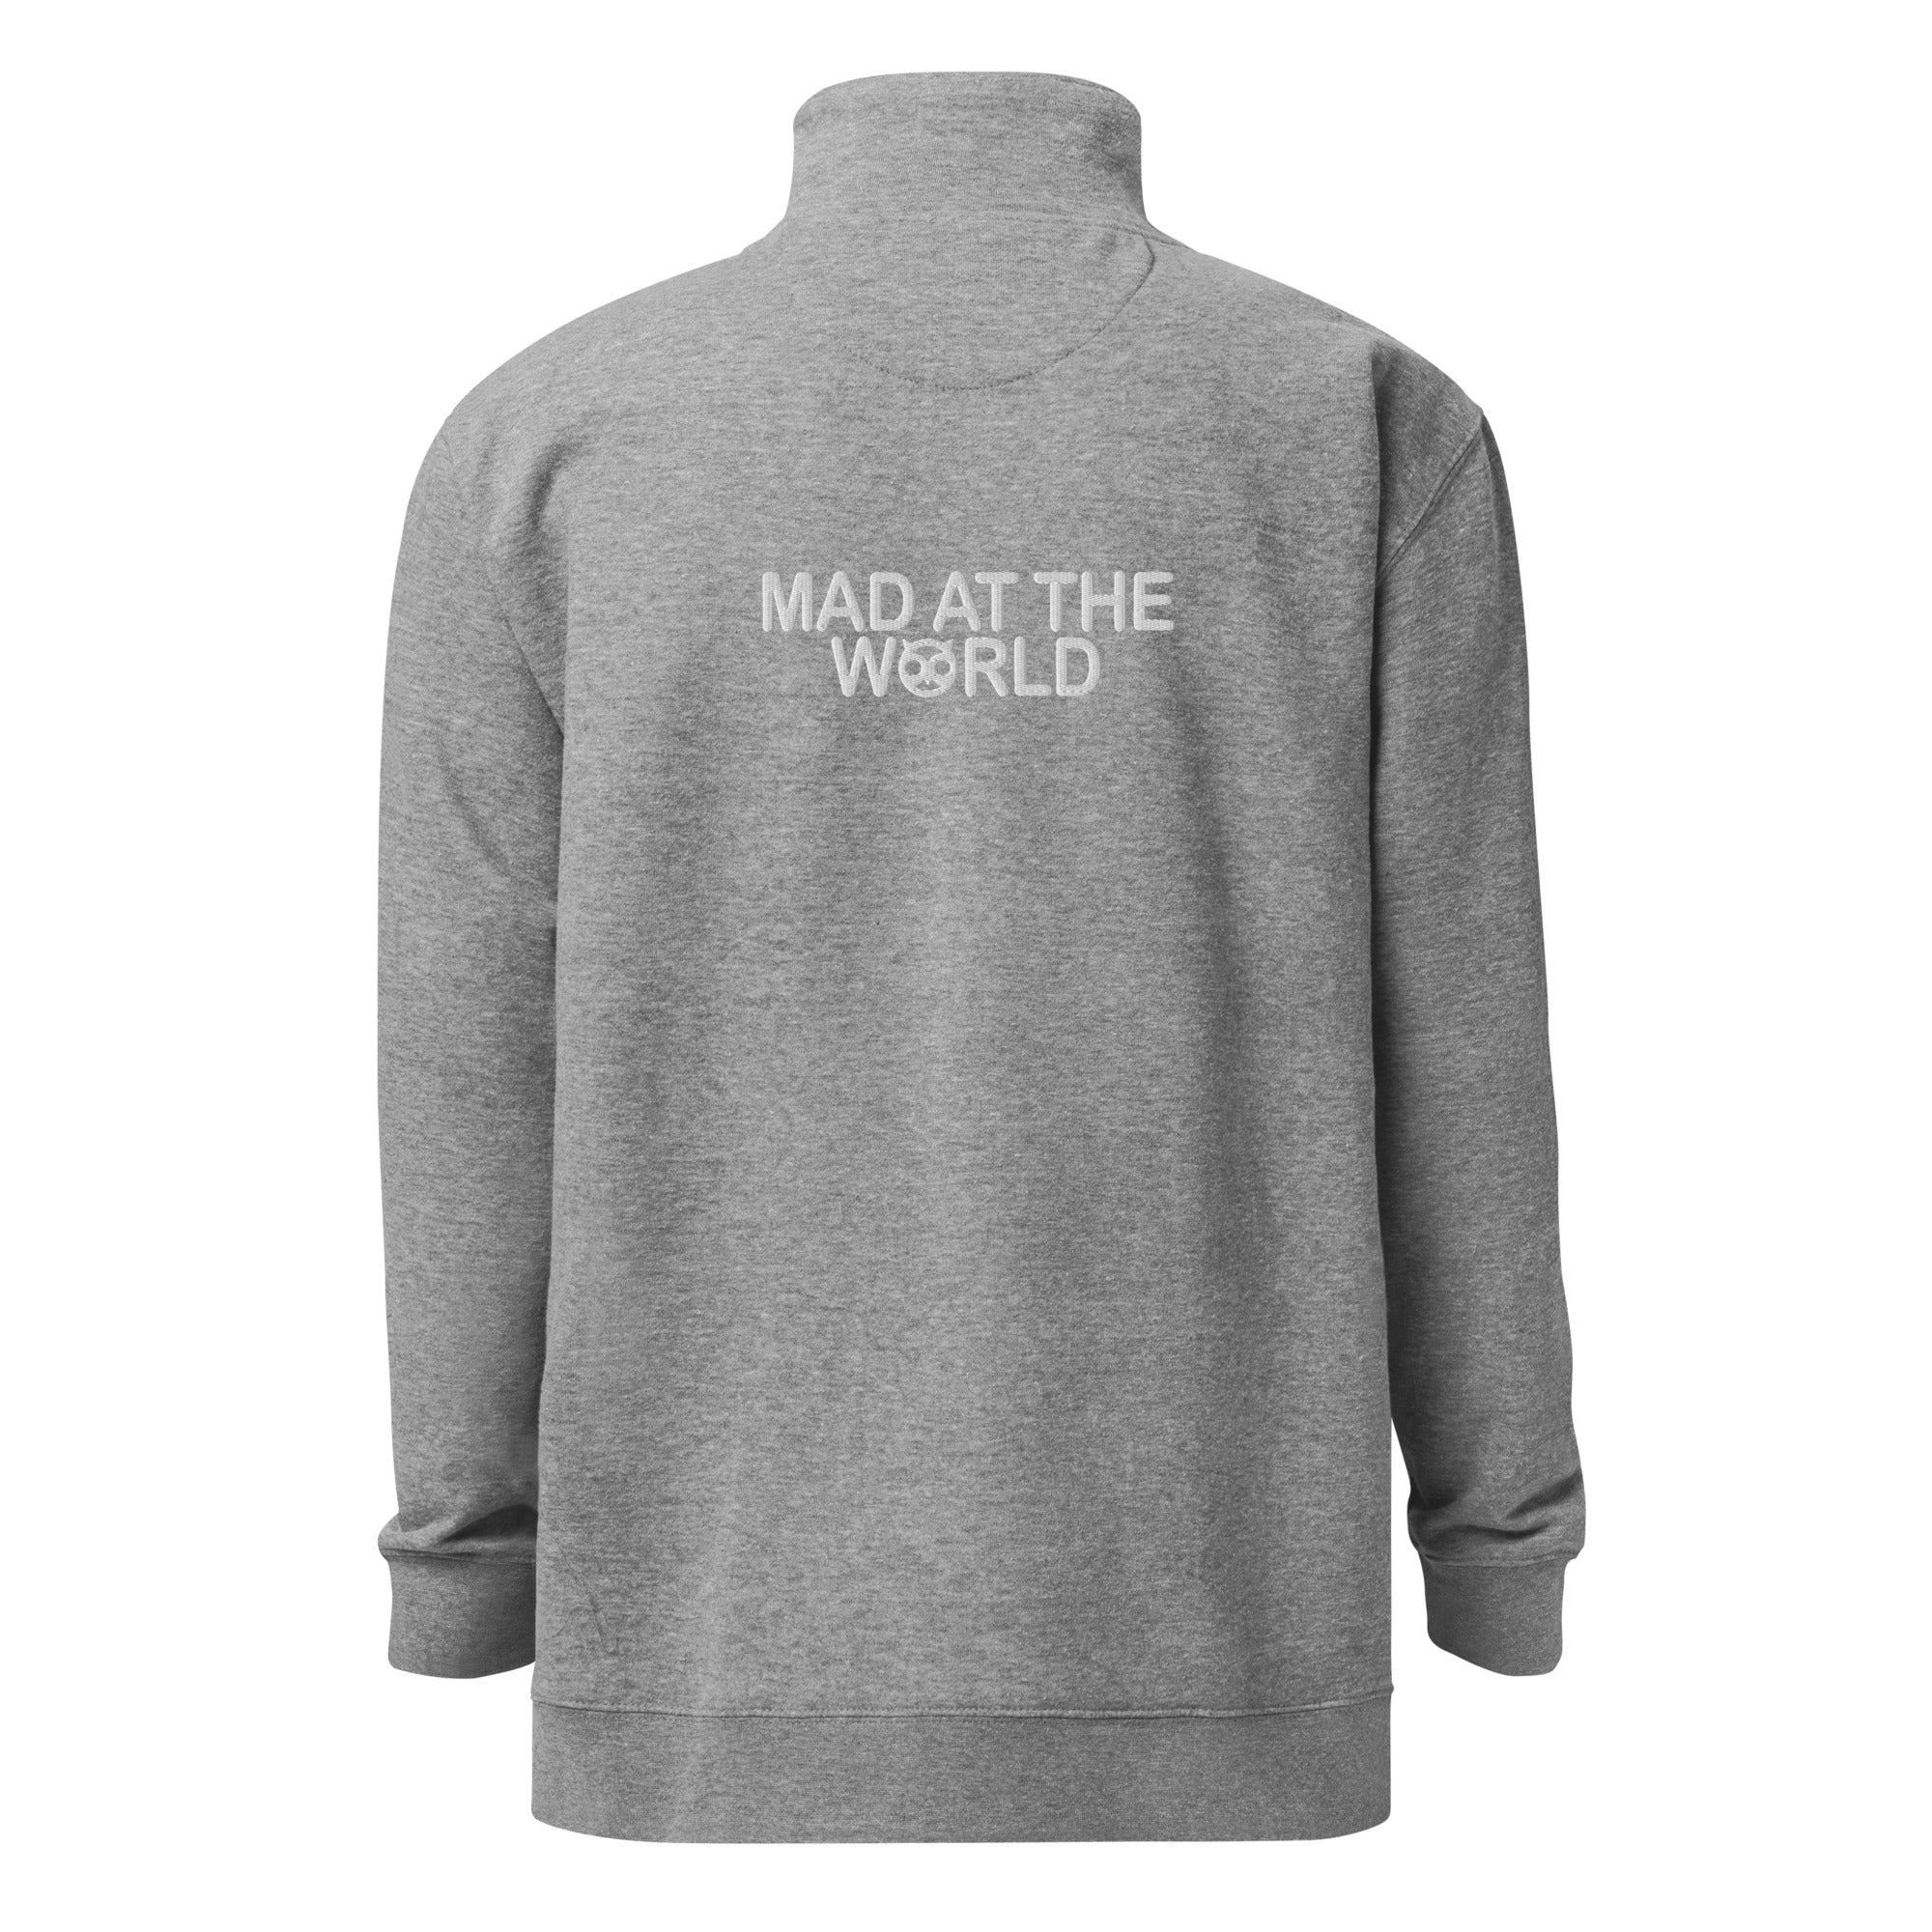 Mad at the World fleece pullover